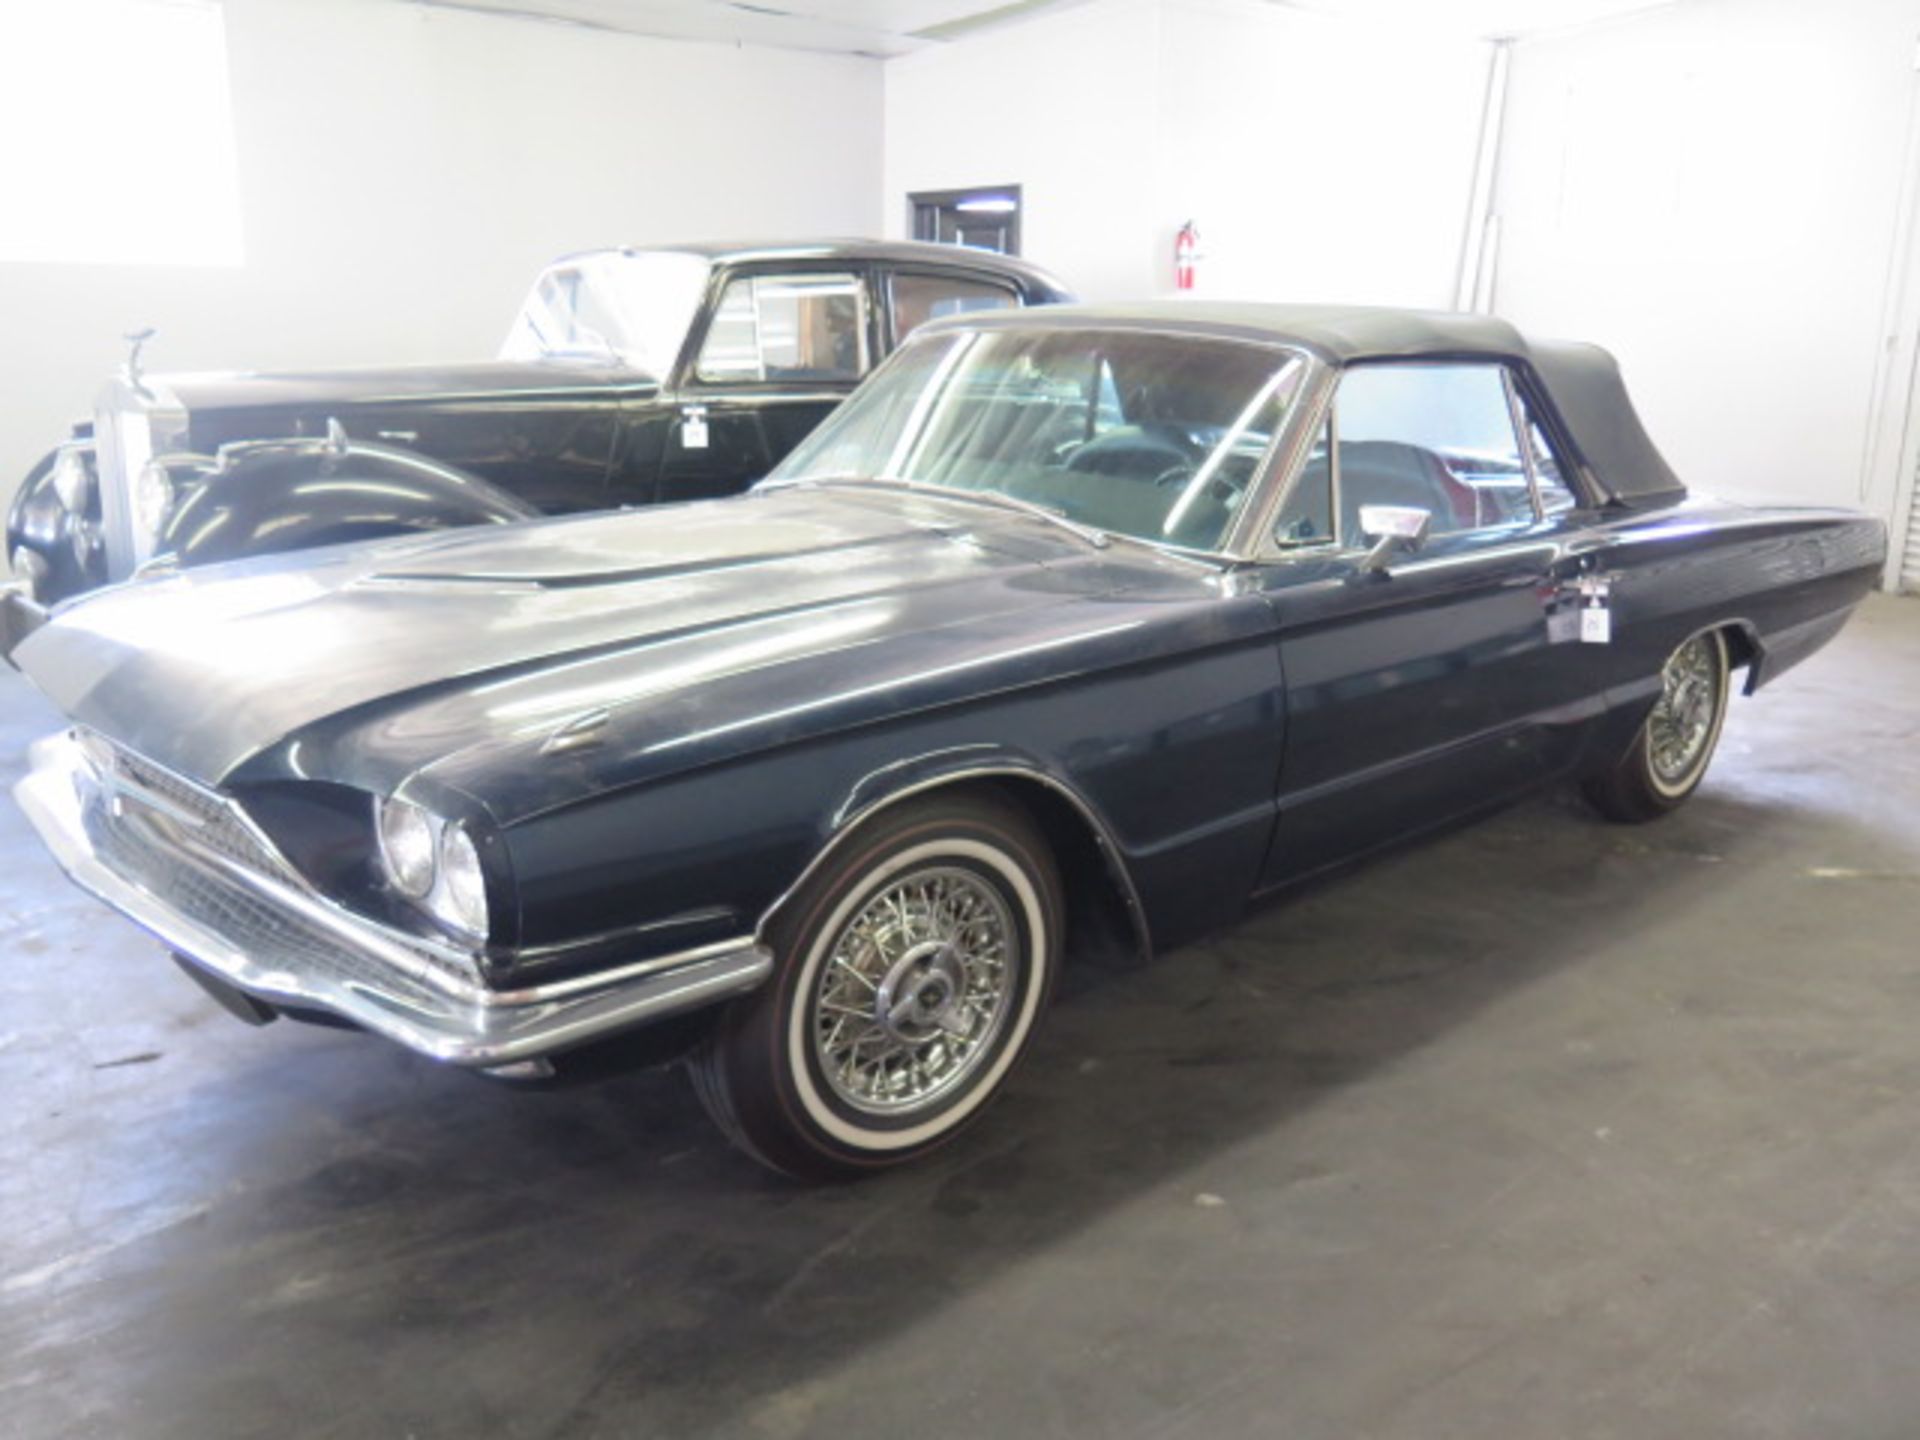 1966 Ford Thunderbird Convertible w/ “Q” Designation V8 428 CID 4 Barrel Carb Gas, SOLD AS IS